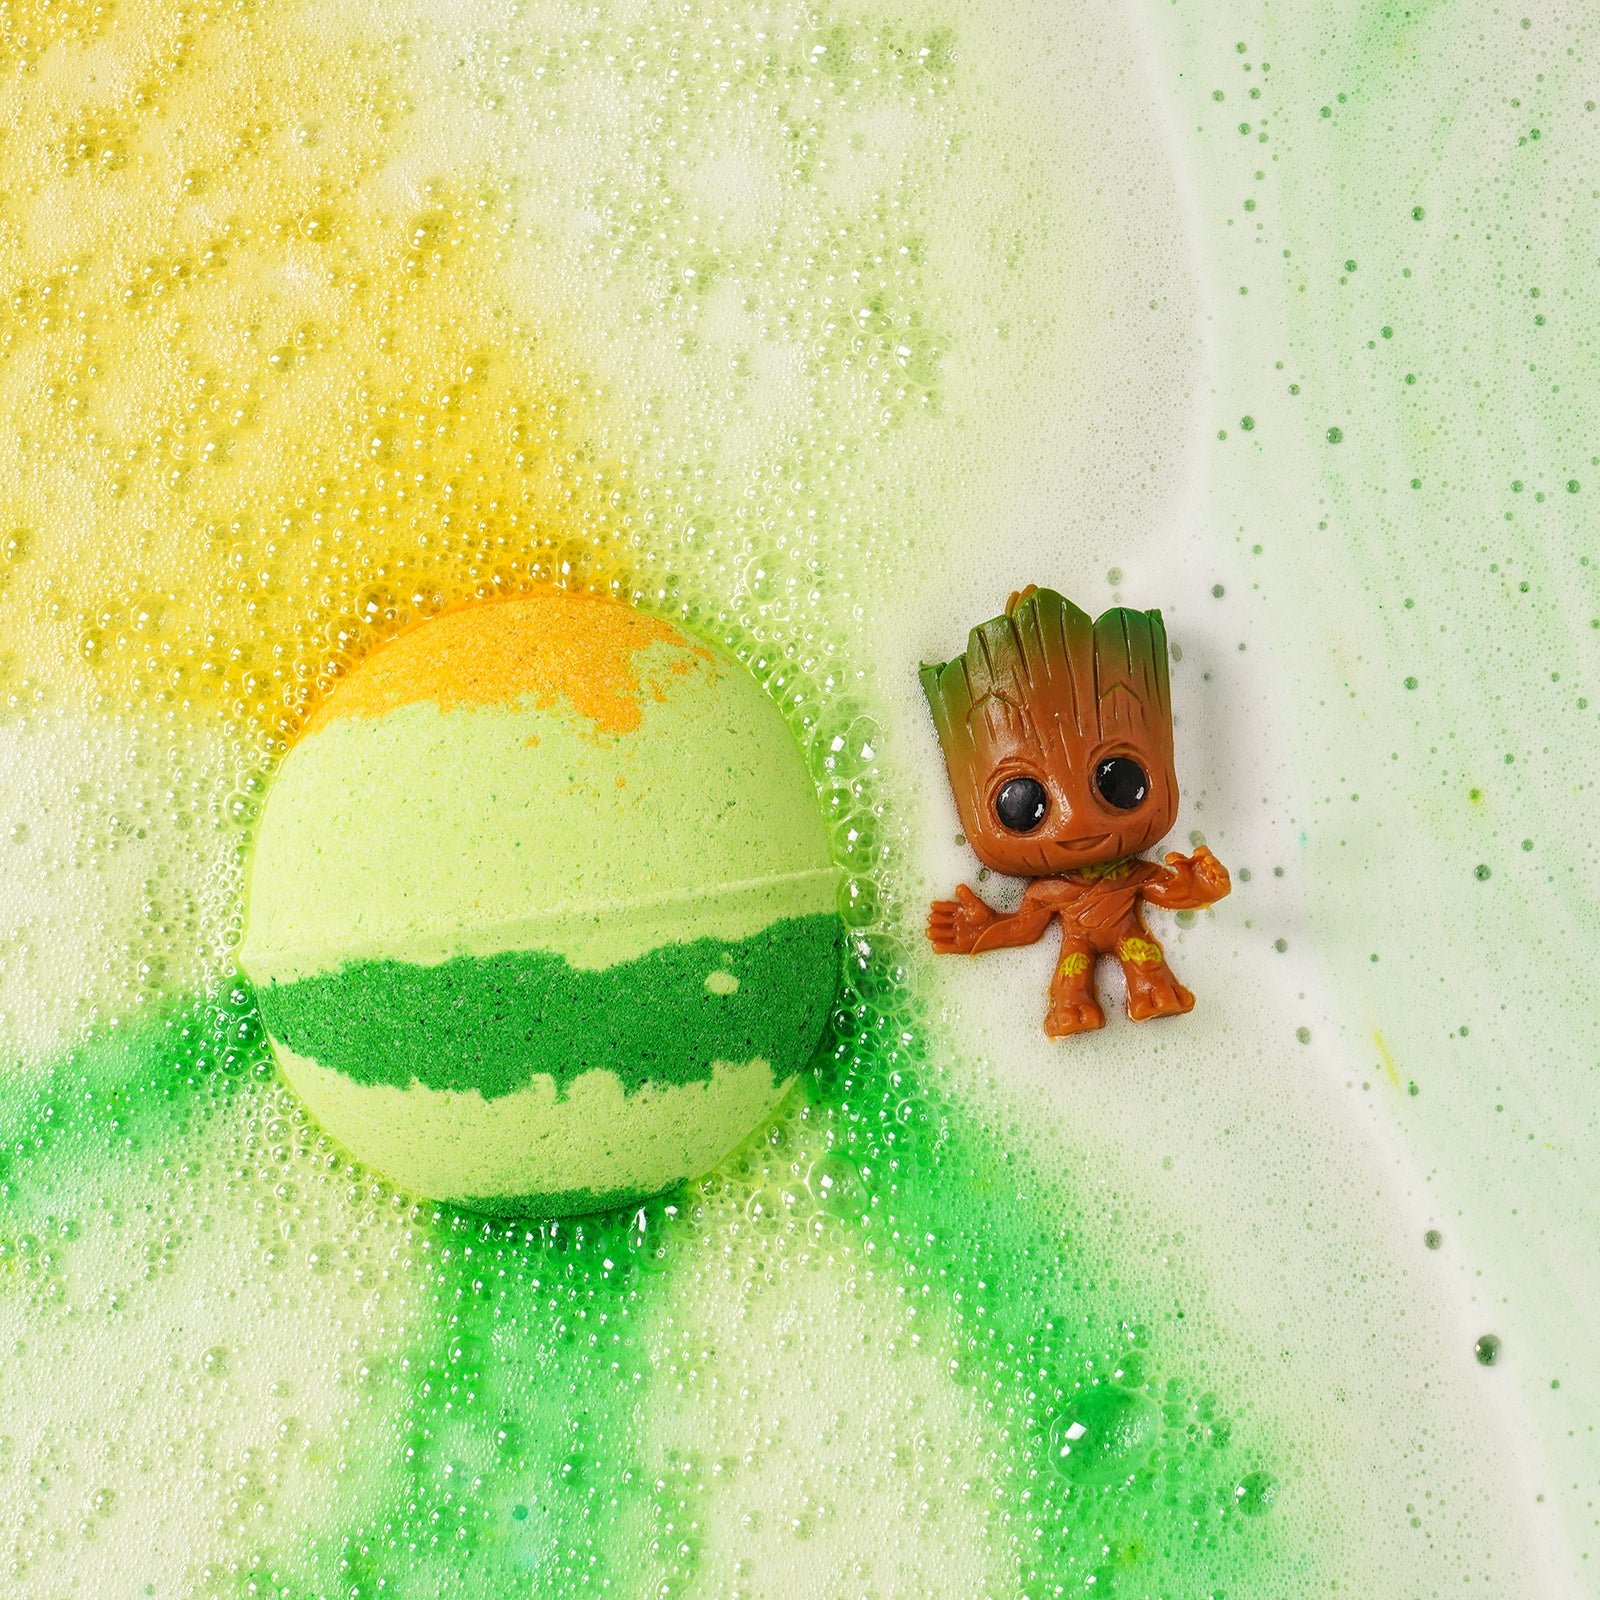 BabyGroot Bath Bombs with Toys Inside